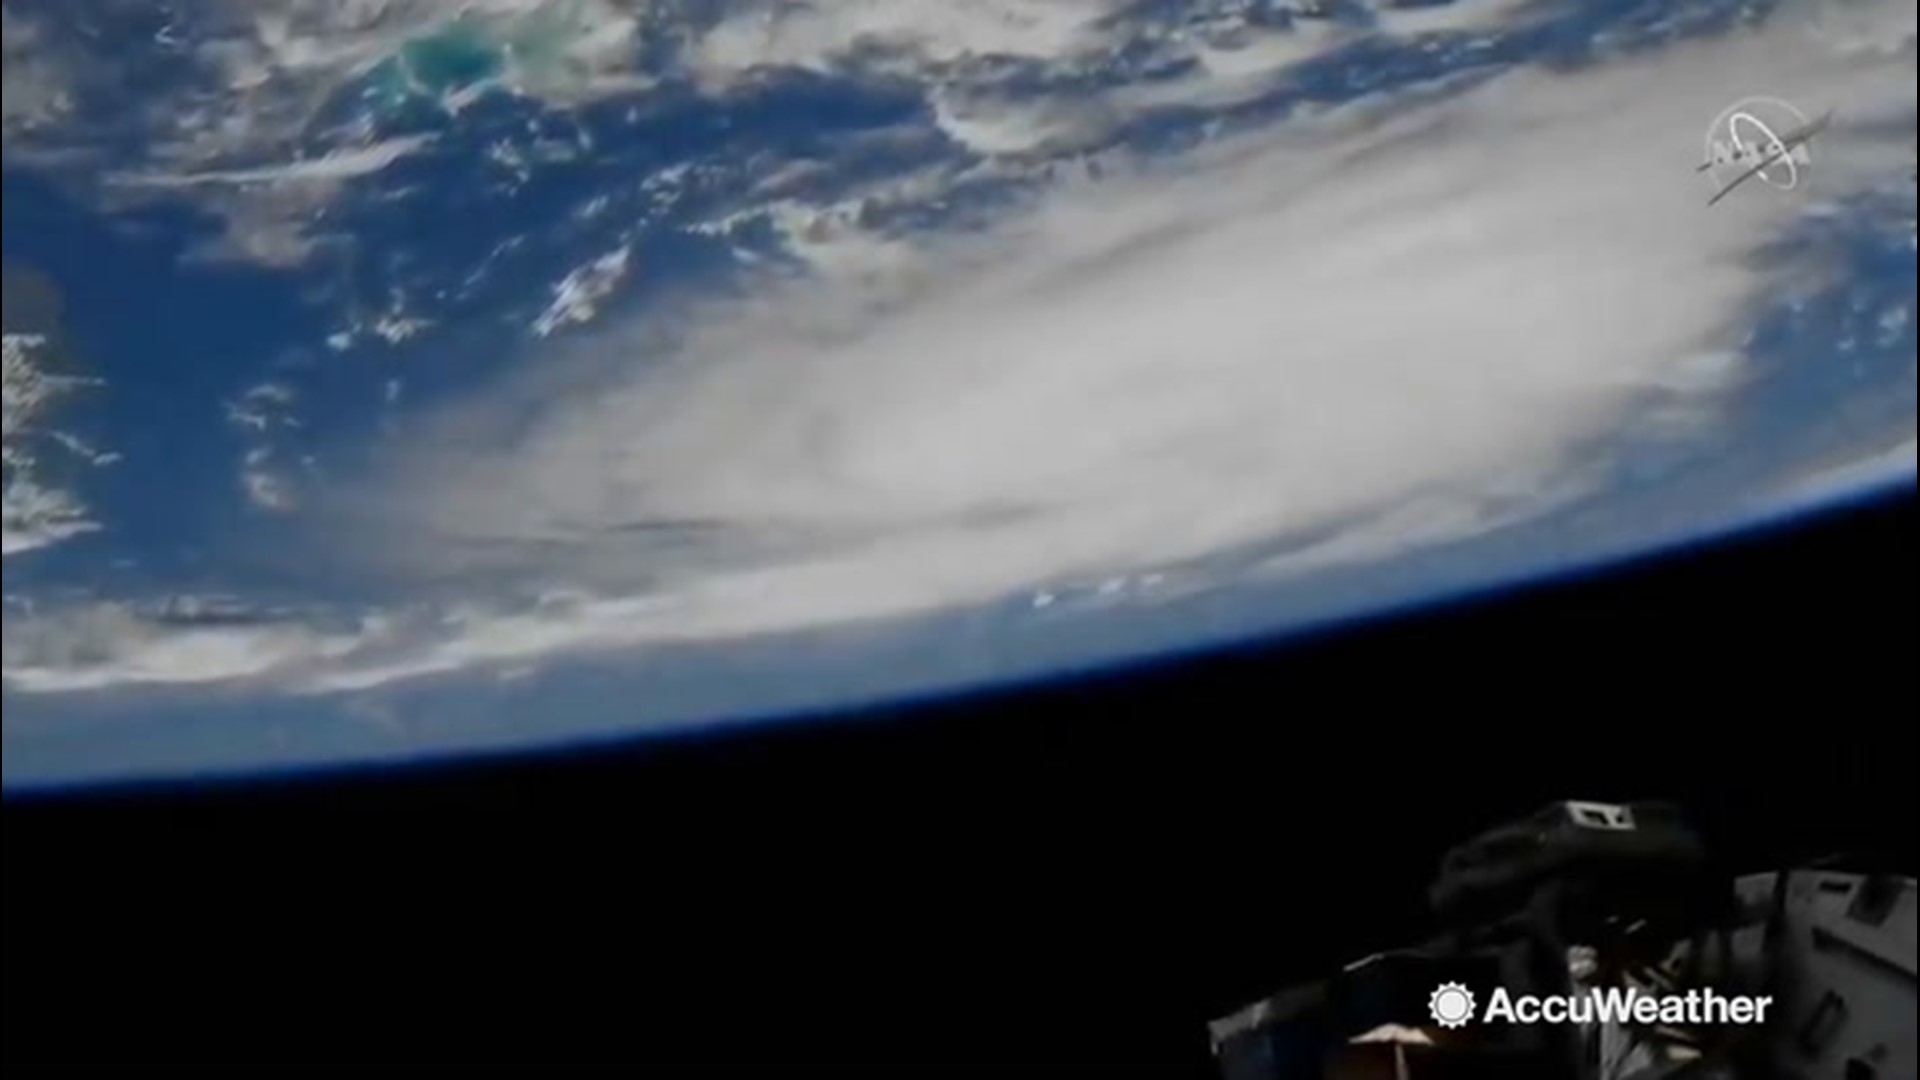 A camera attached to the International Space Station was able to spot and record Hurricane Dorian from its location above the planet on Aug. 29.